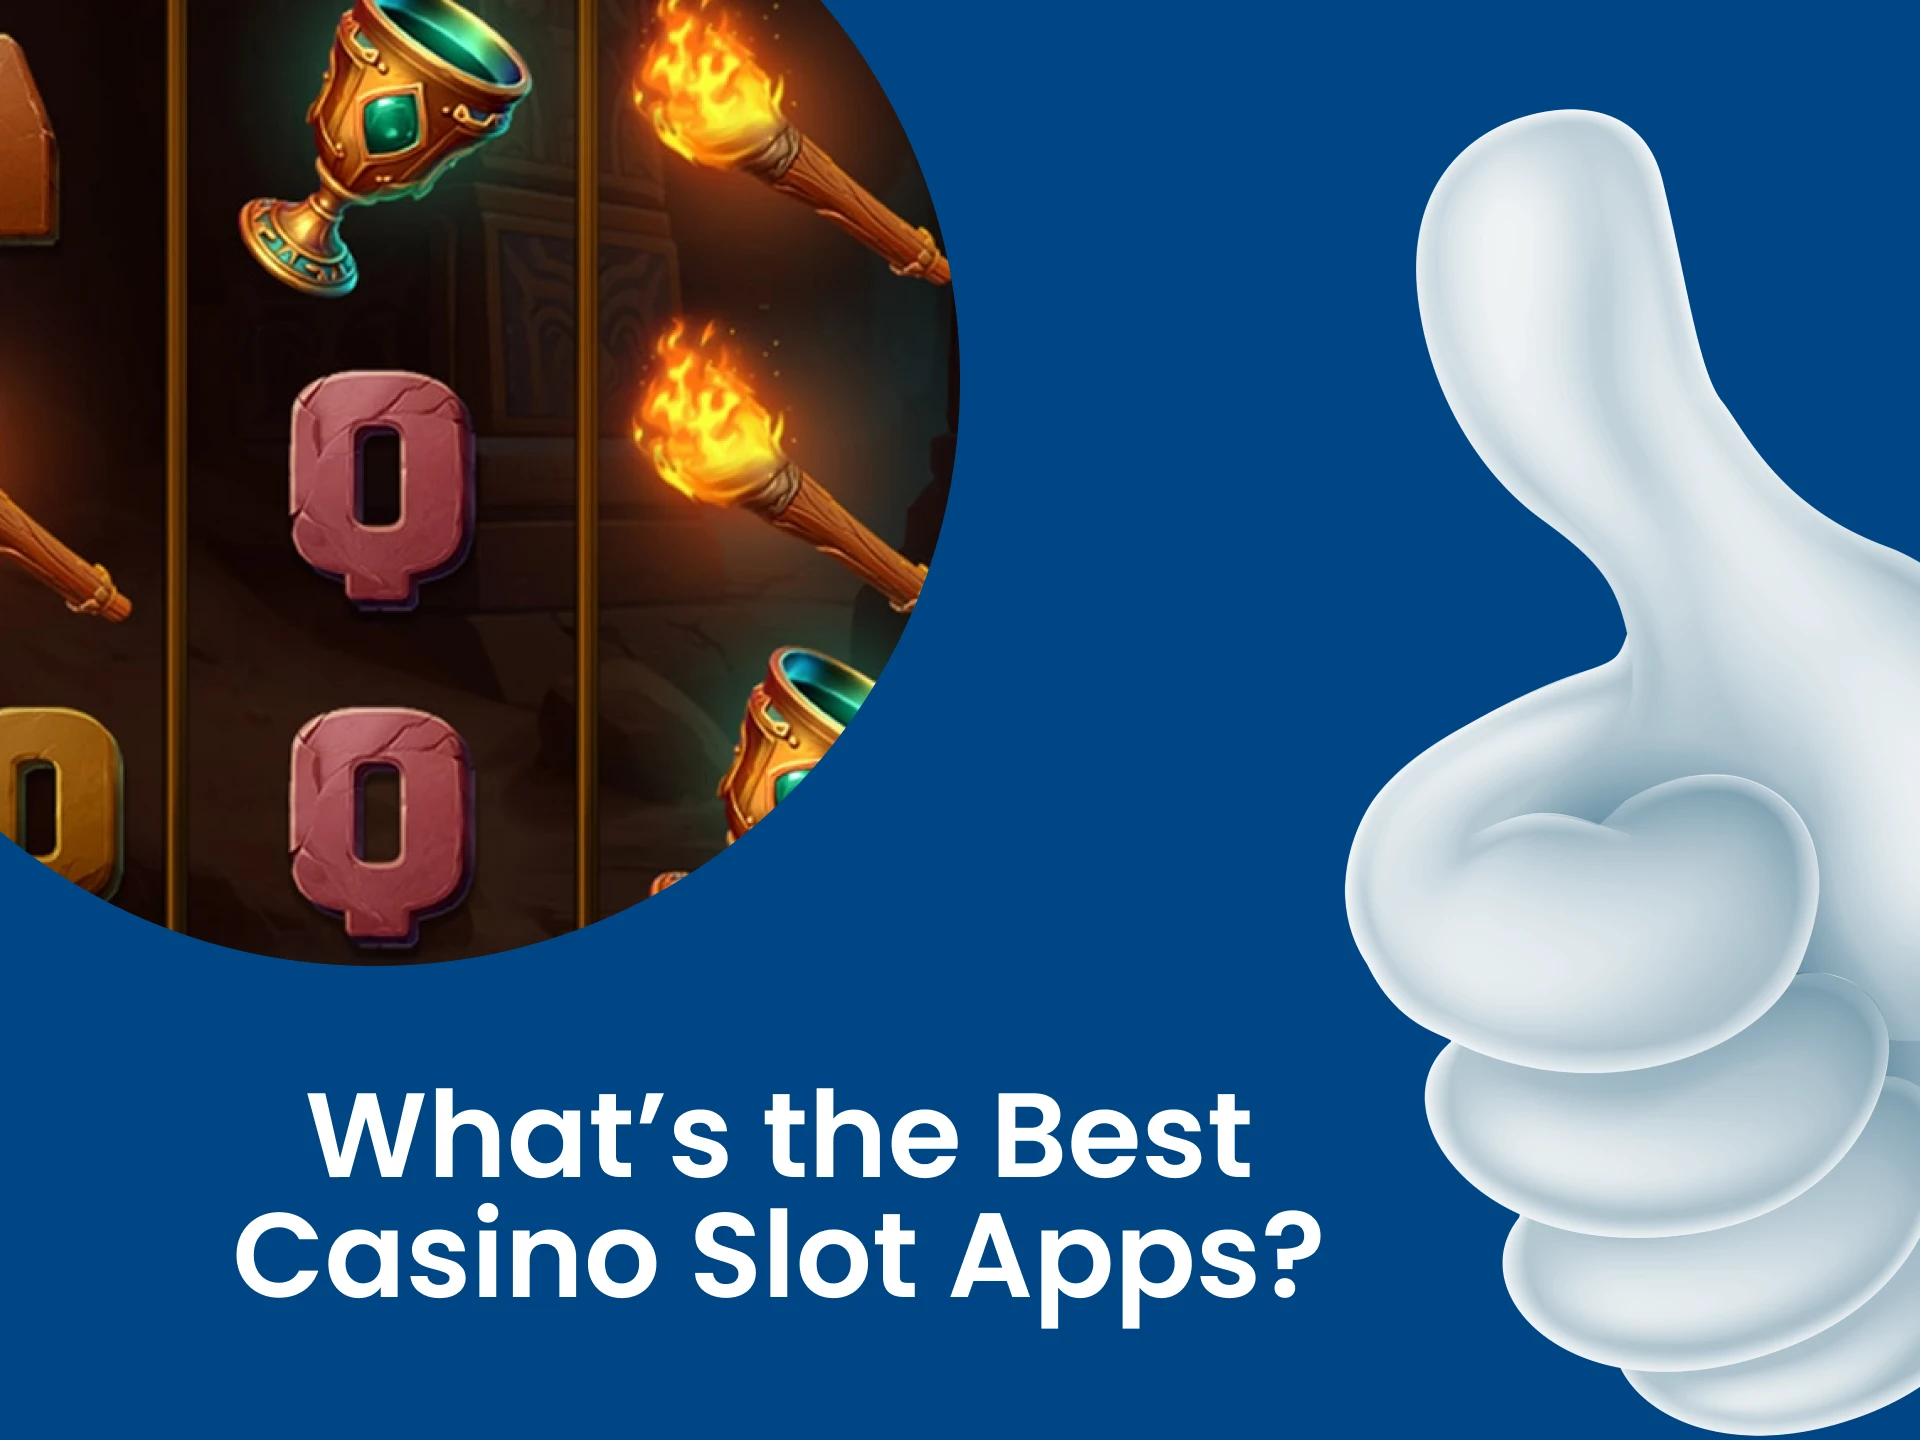 We will tell you which casinos are best to play slots on the iPad.